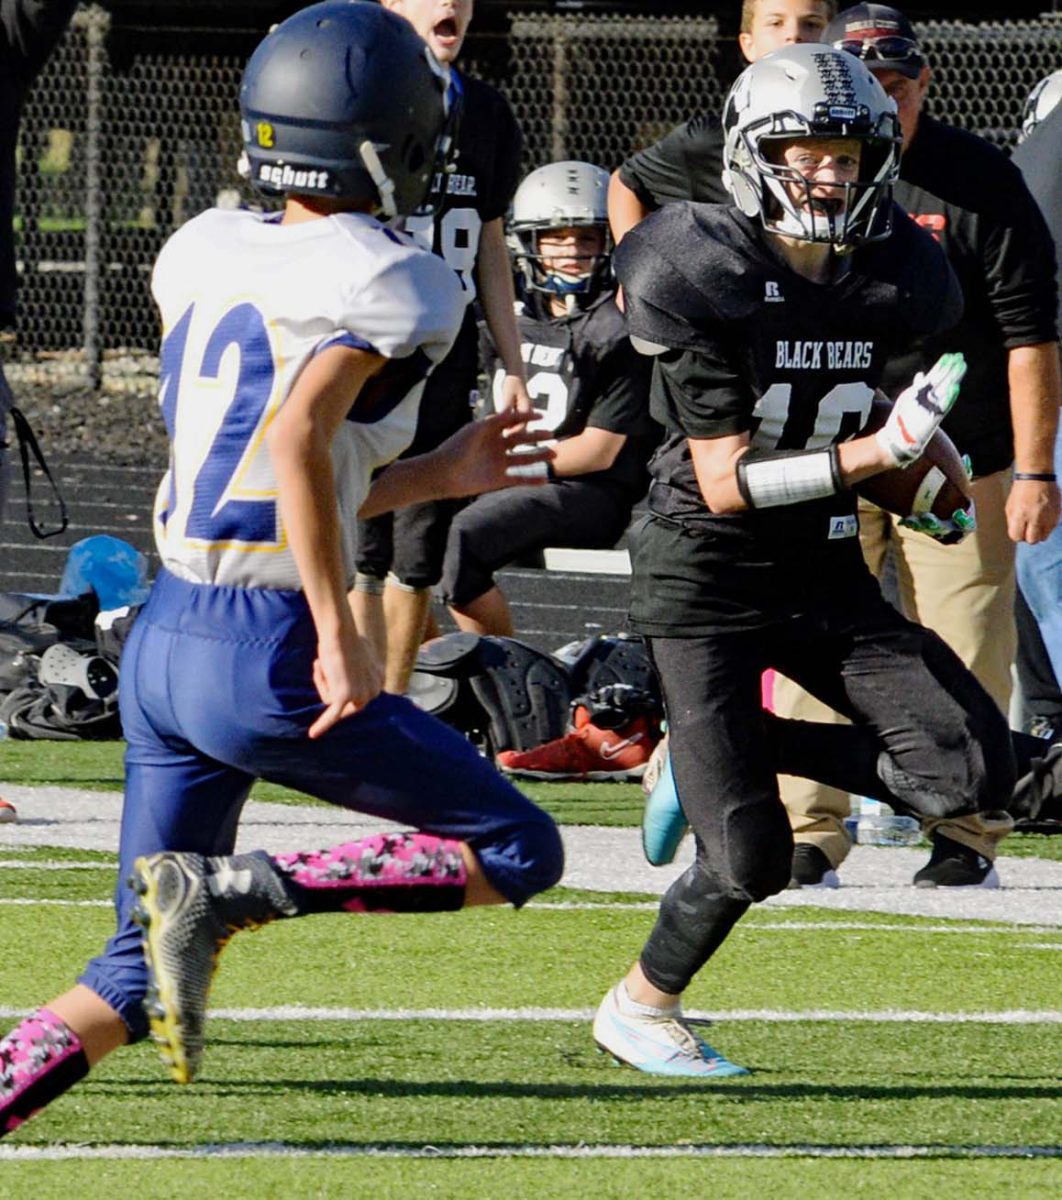 Harlan County running back Caysen Farley broke free for a big run in the Bears 22-0 win over Wayne County in the states seventh-grade playoffs.